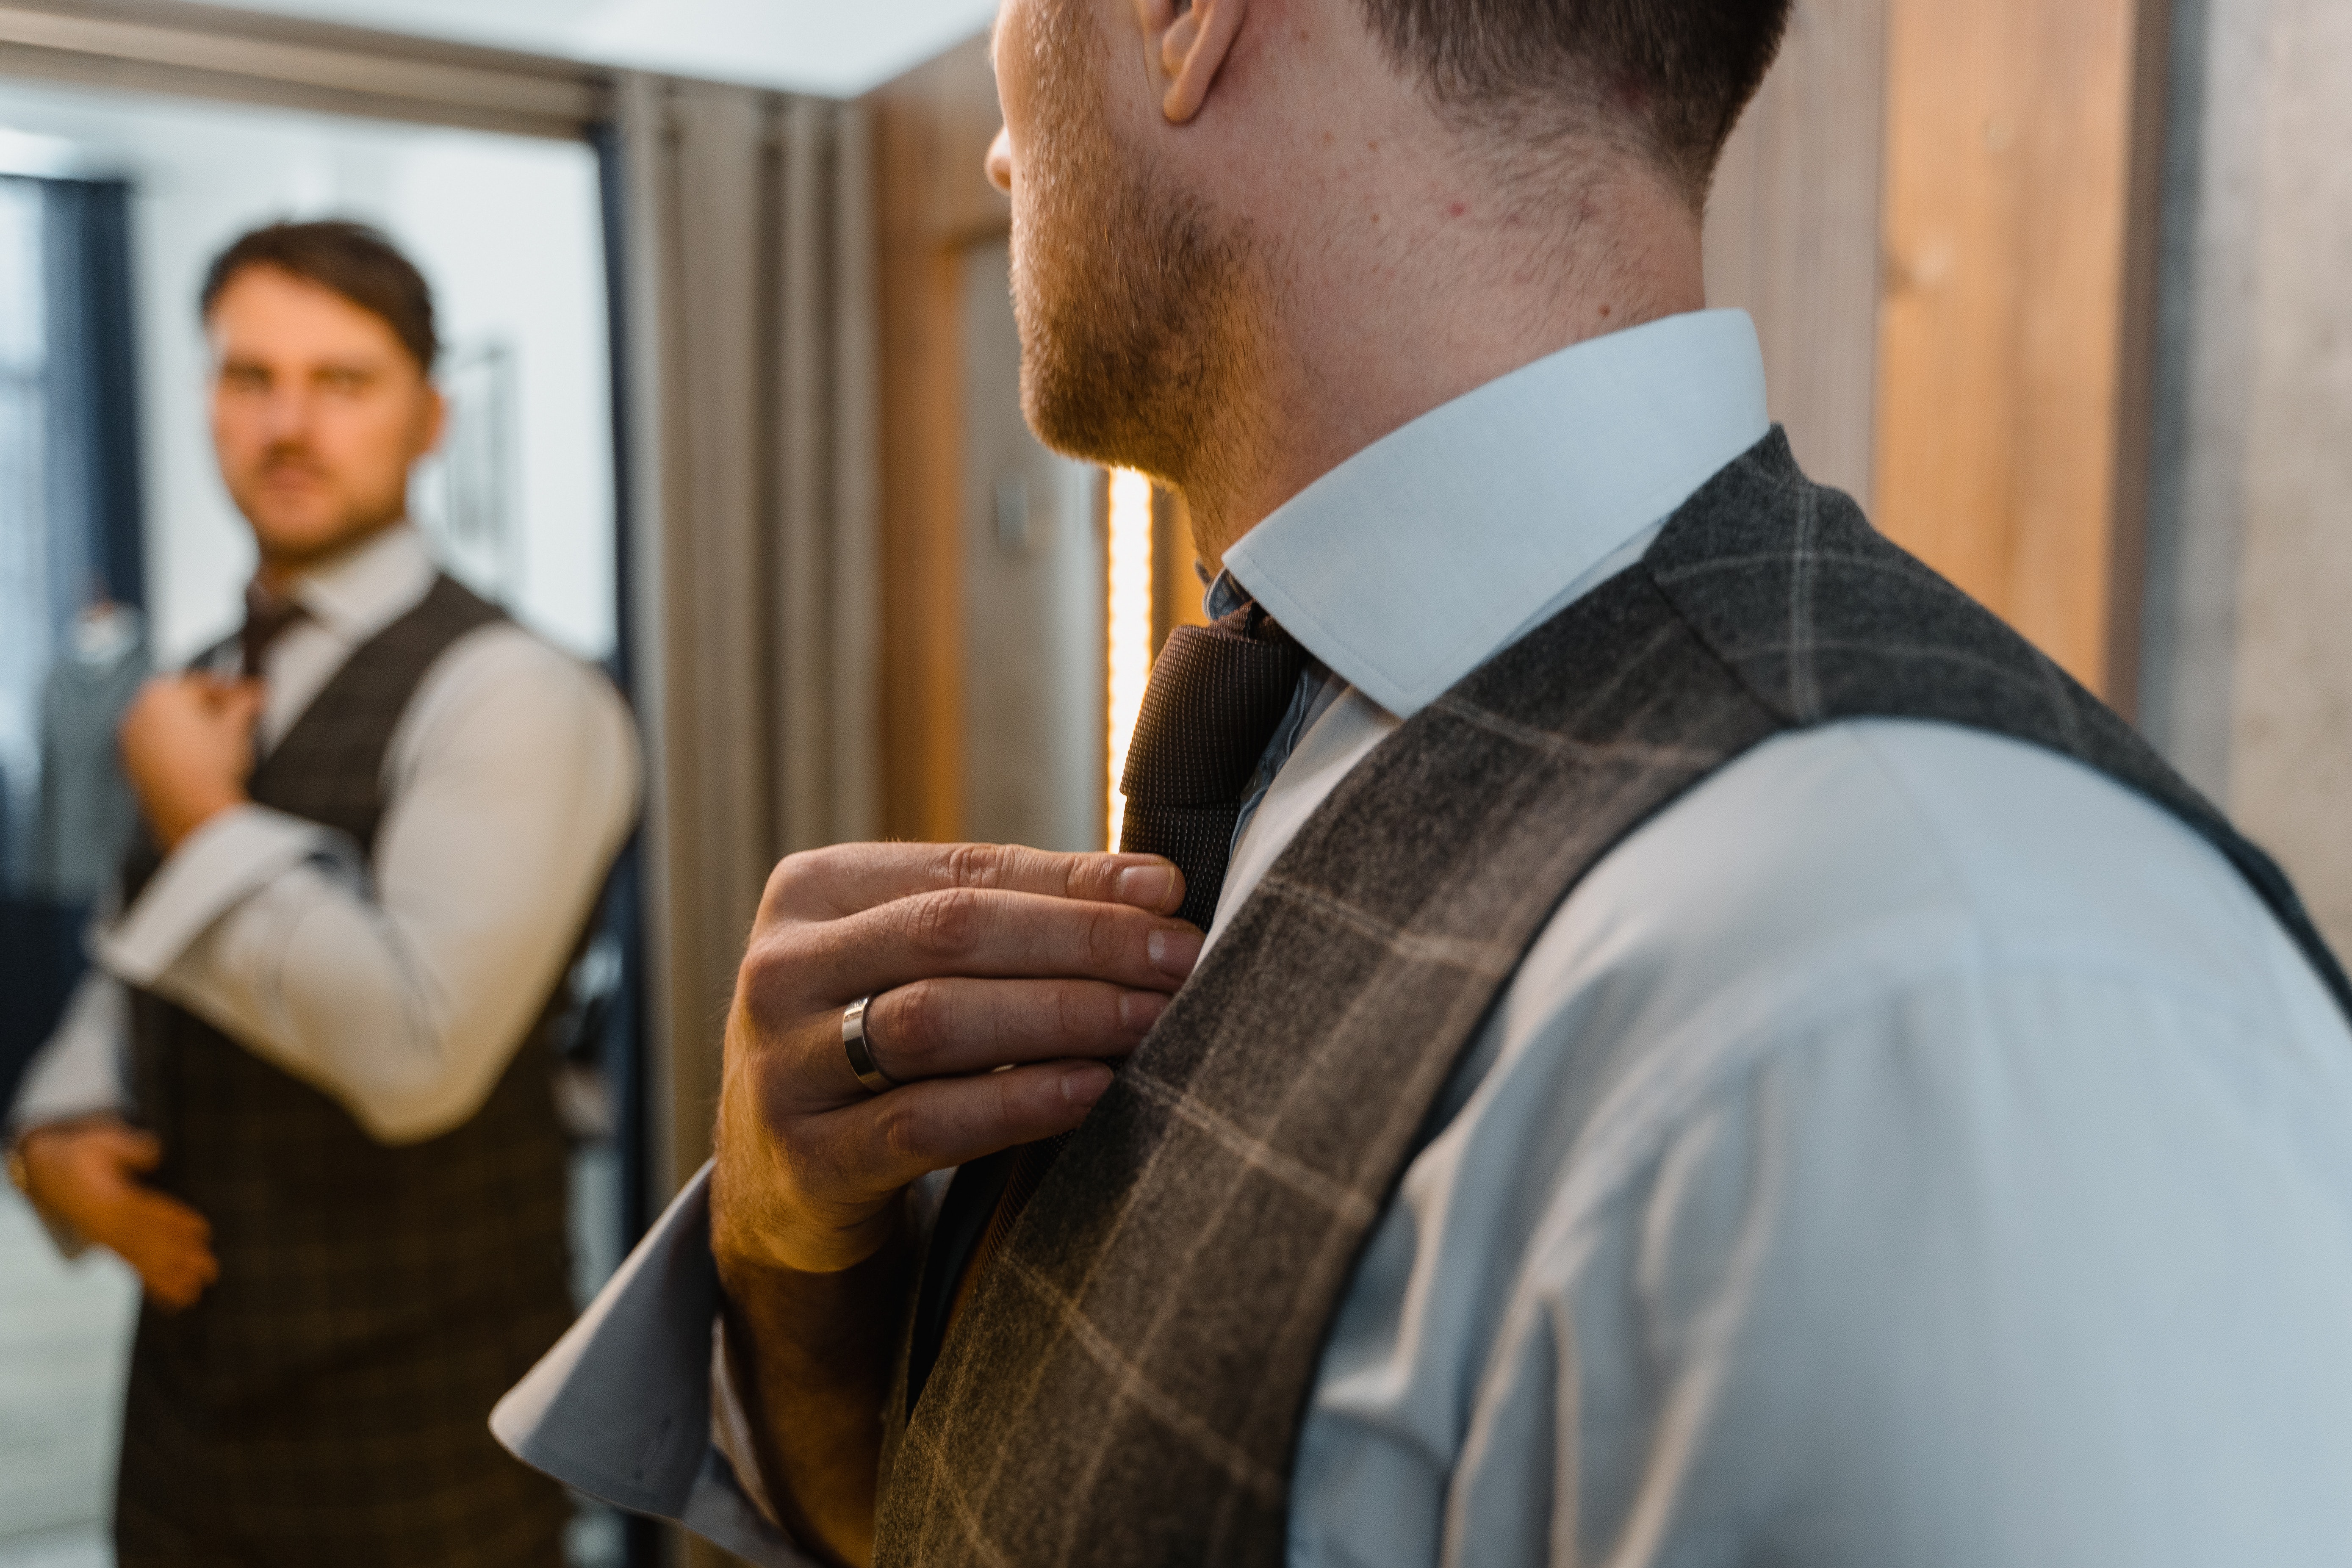 A man looking in a mirror. | Source: Pexels